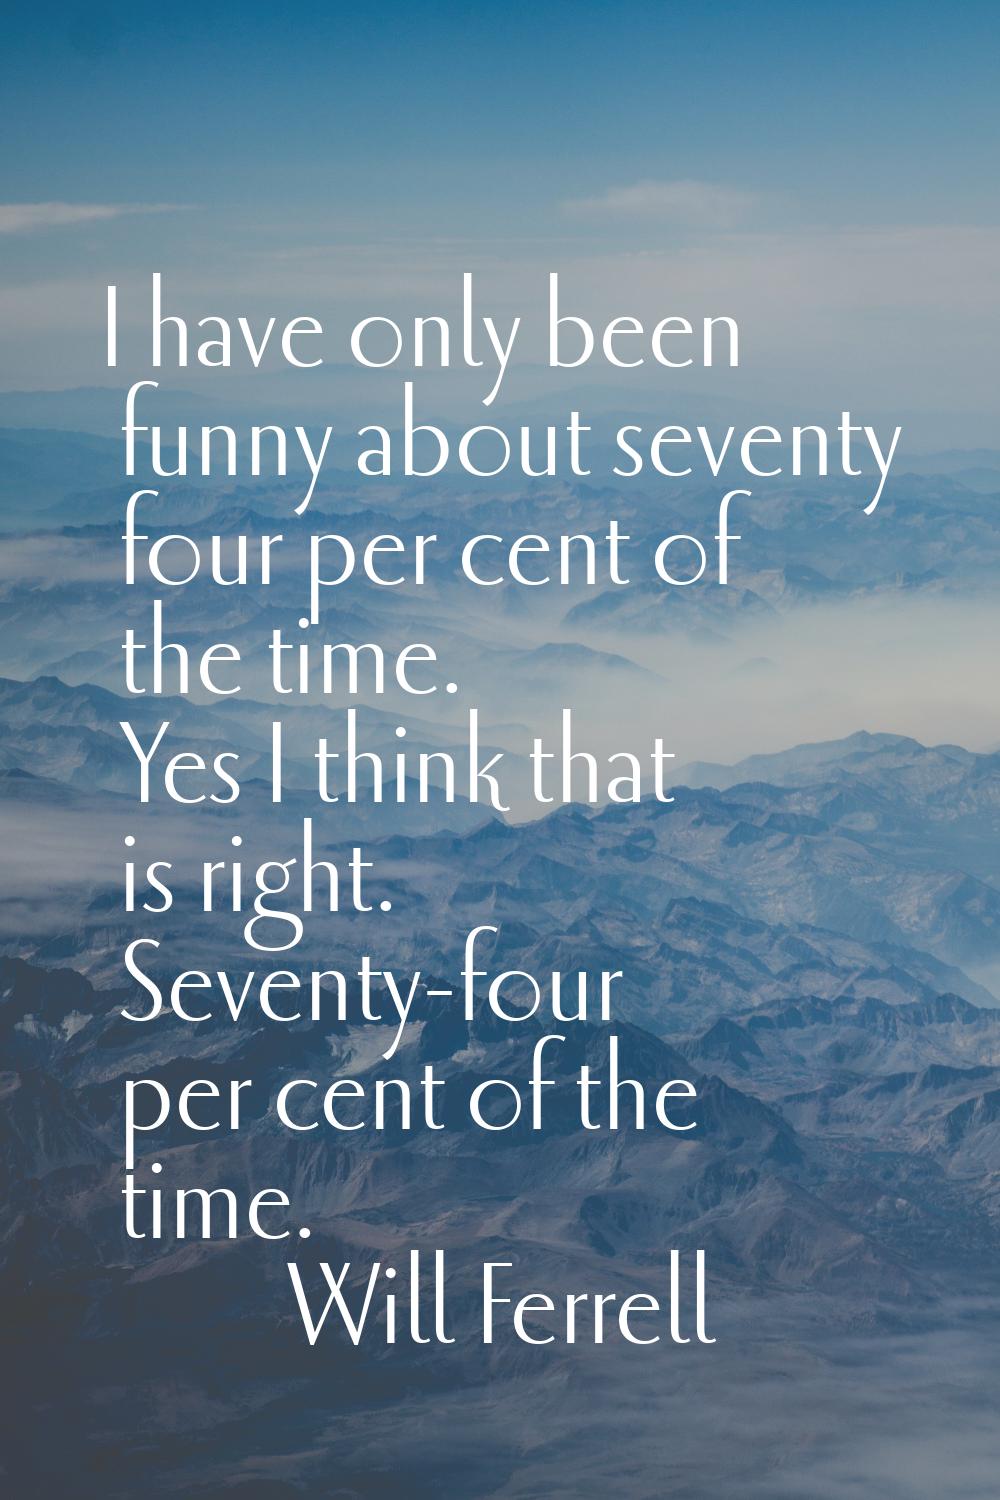 I have only been funny about seventy four per cent of the time. Yes I think that is right. Seventy-